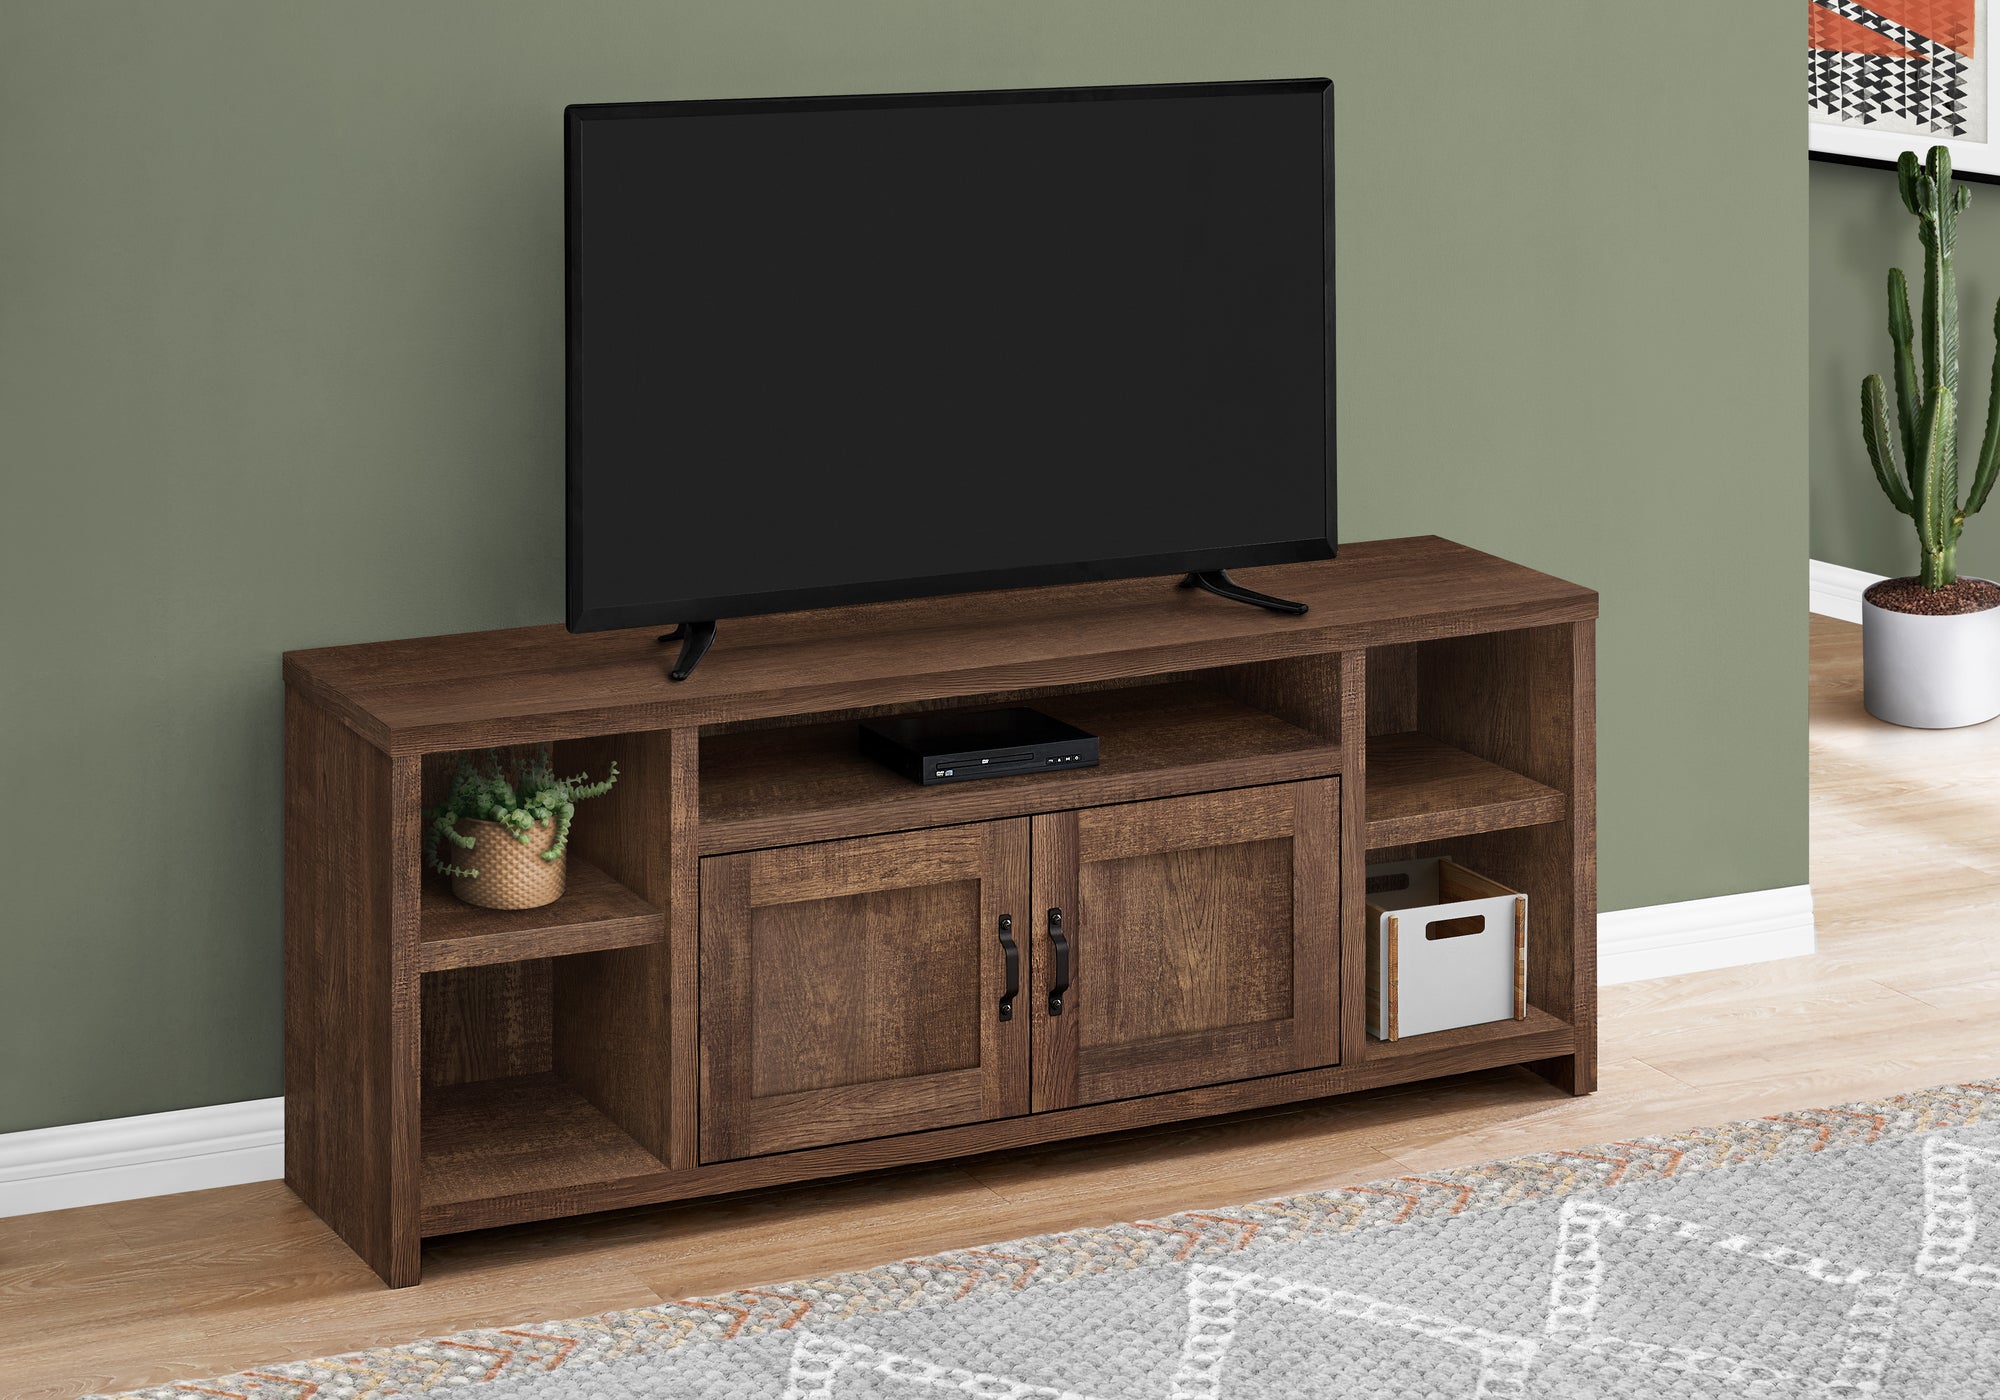 MN-142740    Tv Stand, 60 Inch, Console, Media Entertainment Center, Storage Cabinet, Living Room, Bedroom, Laminate, Brown Reclaimed Wood Look, Contemporary, Industrial, Modern